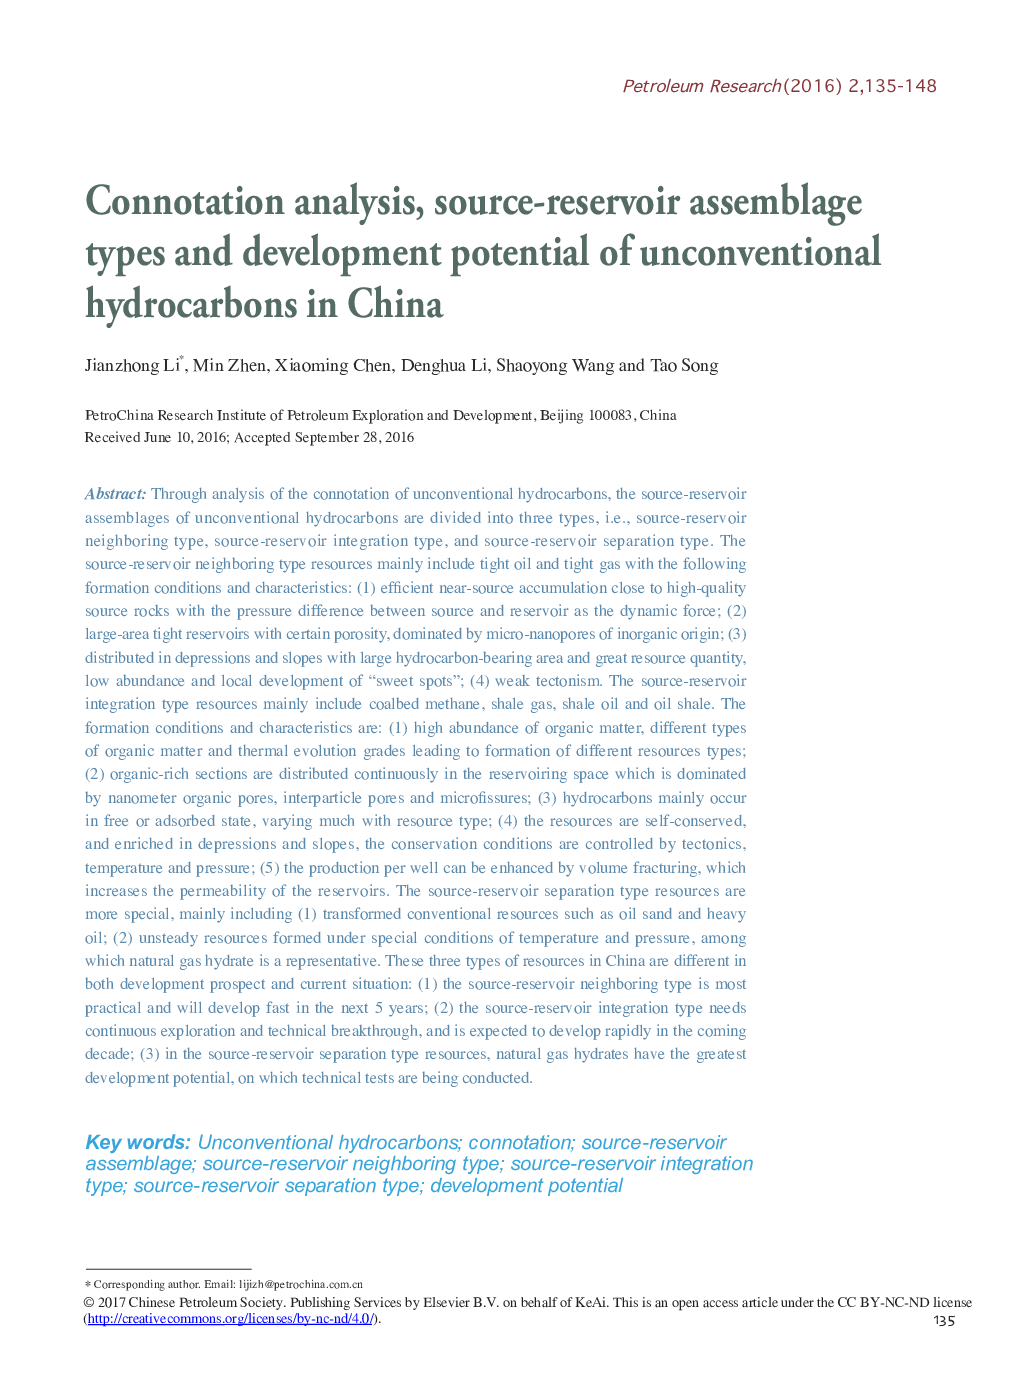 Connotation analysis, source-reservoir assemblage types and development potential of unconventional hydrocarbons in China